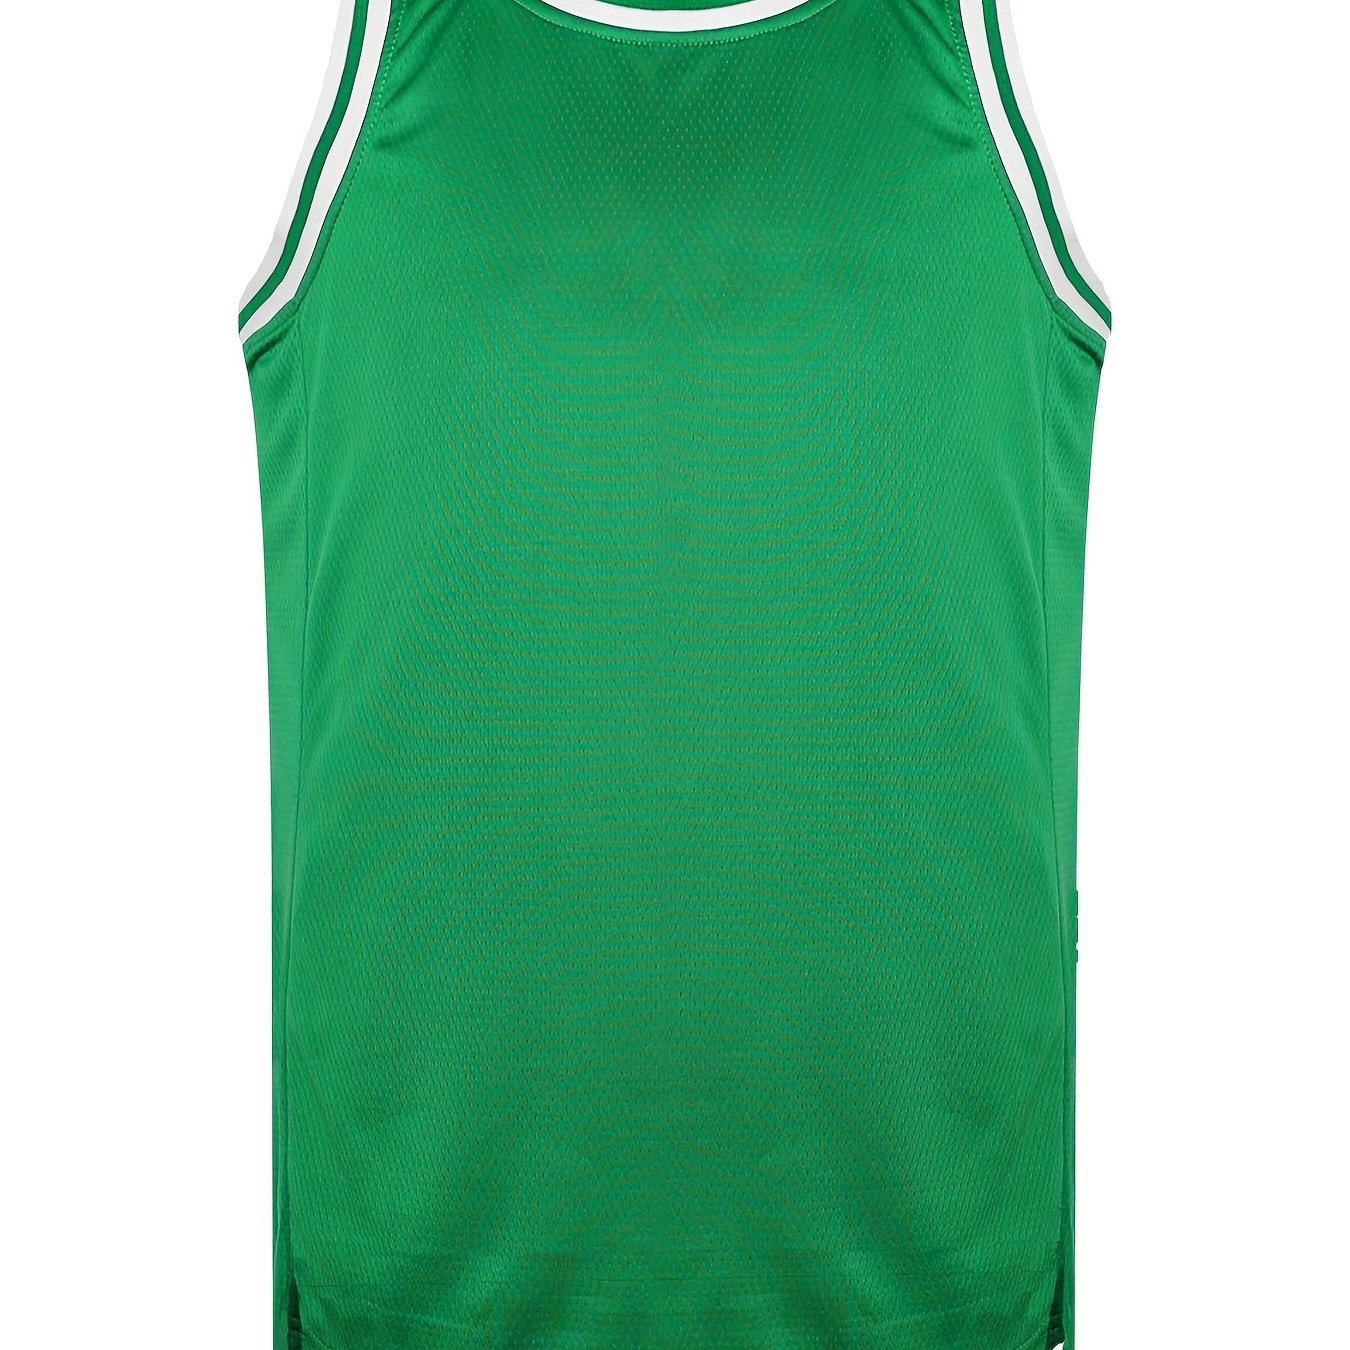 Men's O'cet #30 Basketball Jersey, Retro Embroidery Breathable Sports  Uniform, Sleeveless Basketball Shirt For Training Competition Party Costume  Gift - Temu